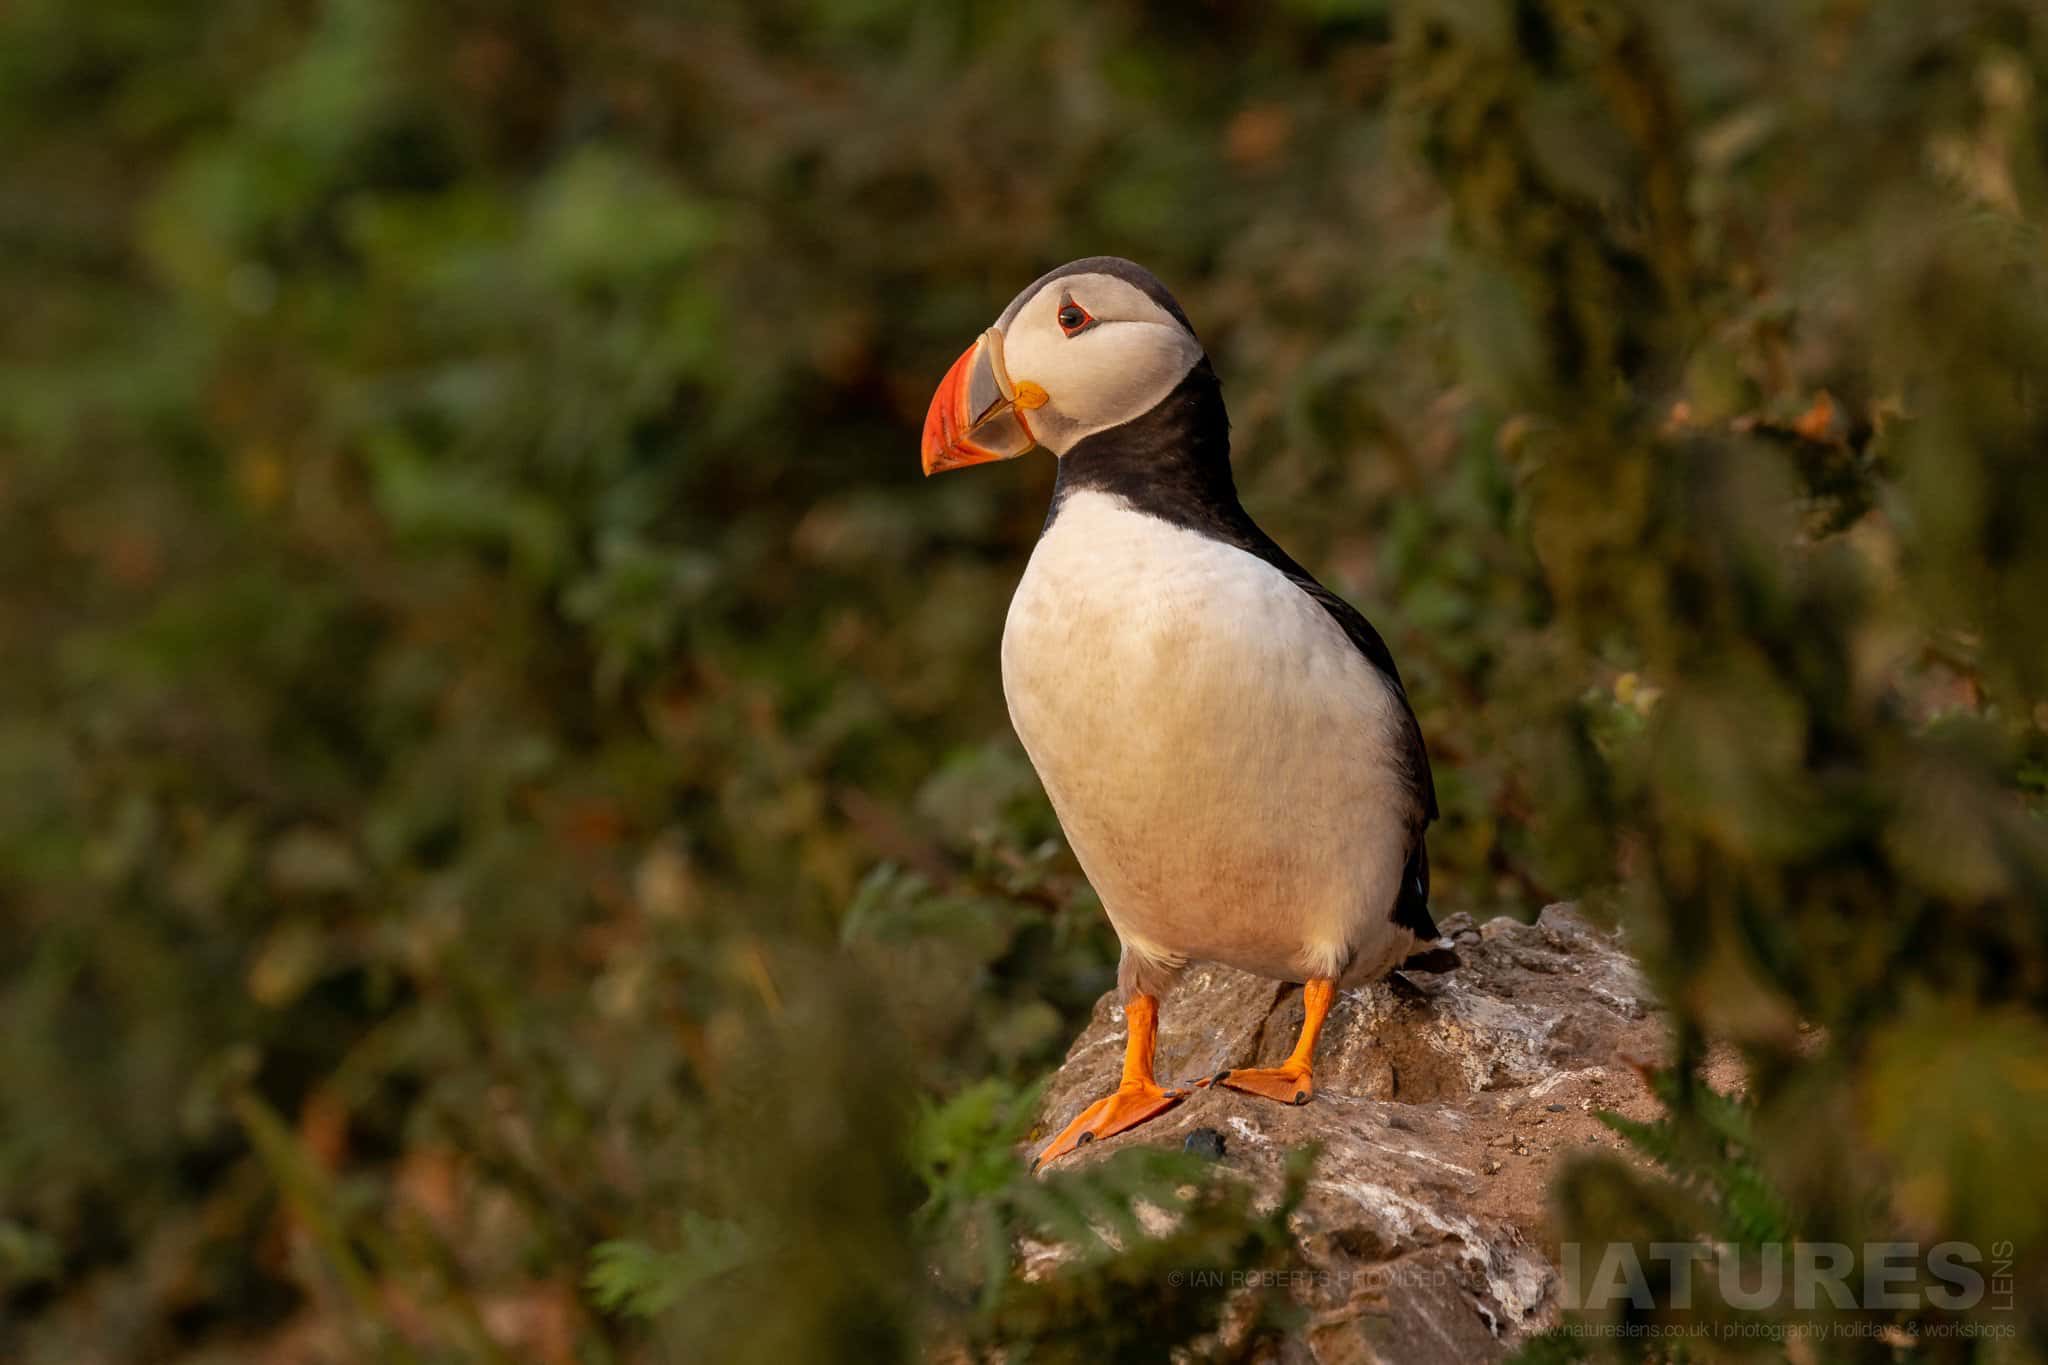 A Puffin Illuminated By The Evening Sun This Image Was Captured By Ian Roberts During The Natureslens Welsh Puffins Of Skomer Island Photography Holiday